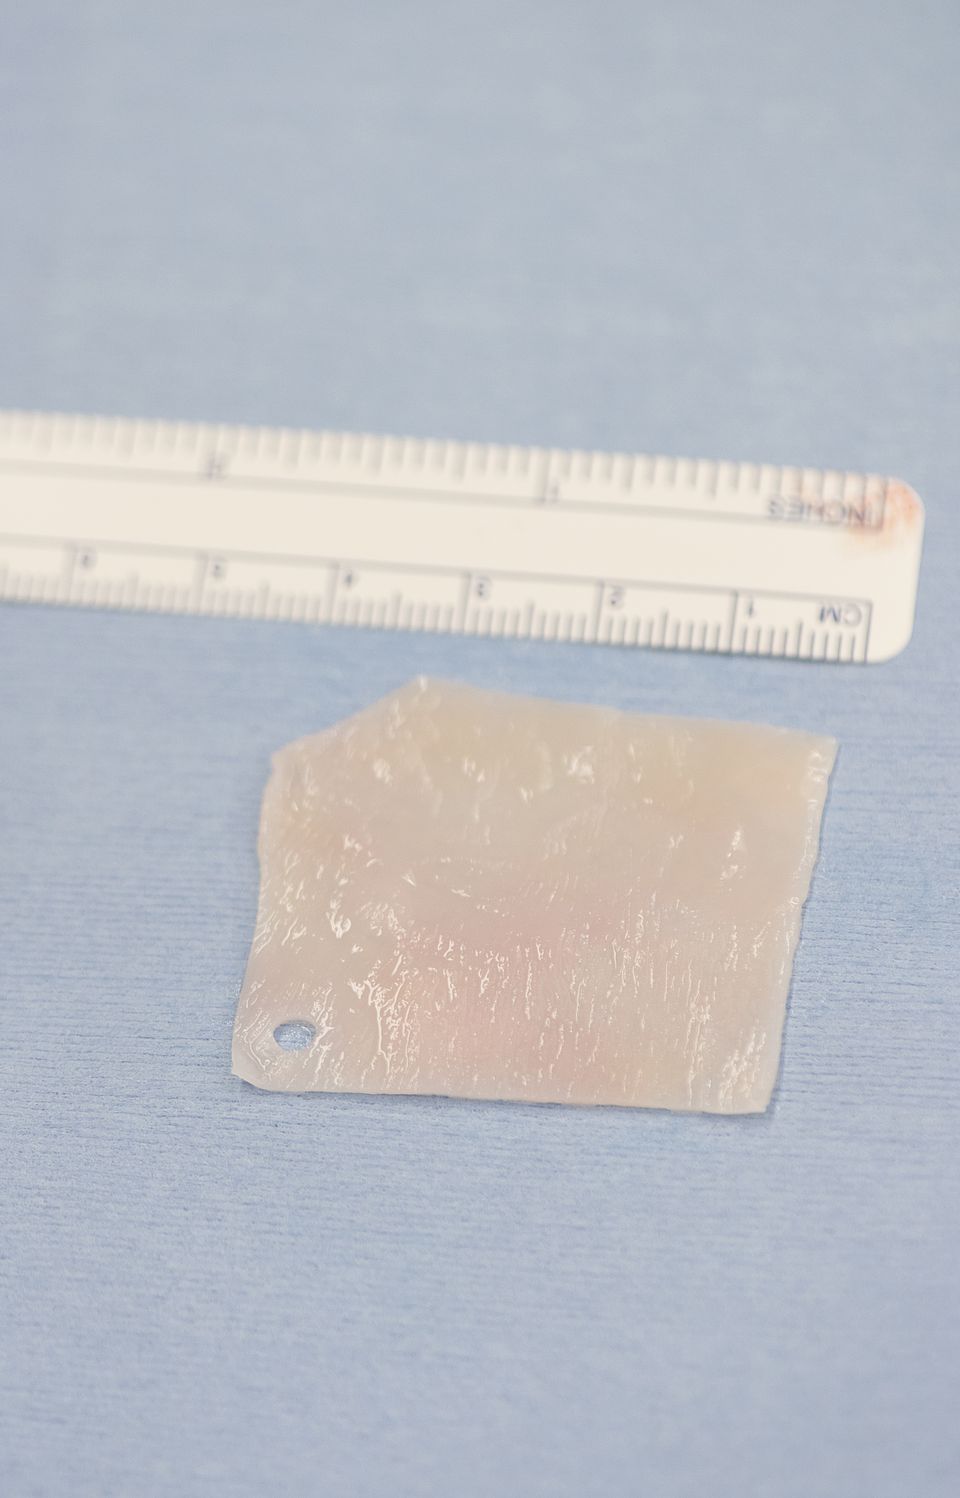 Engineered cartilage graft of about 20cm2, manufactured from a nasal cartilage biopsy .